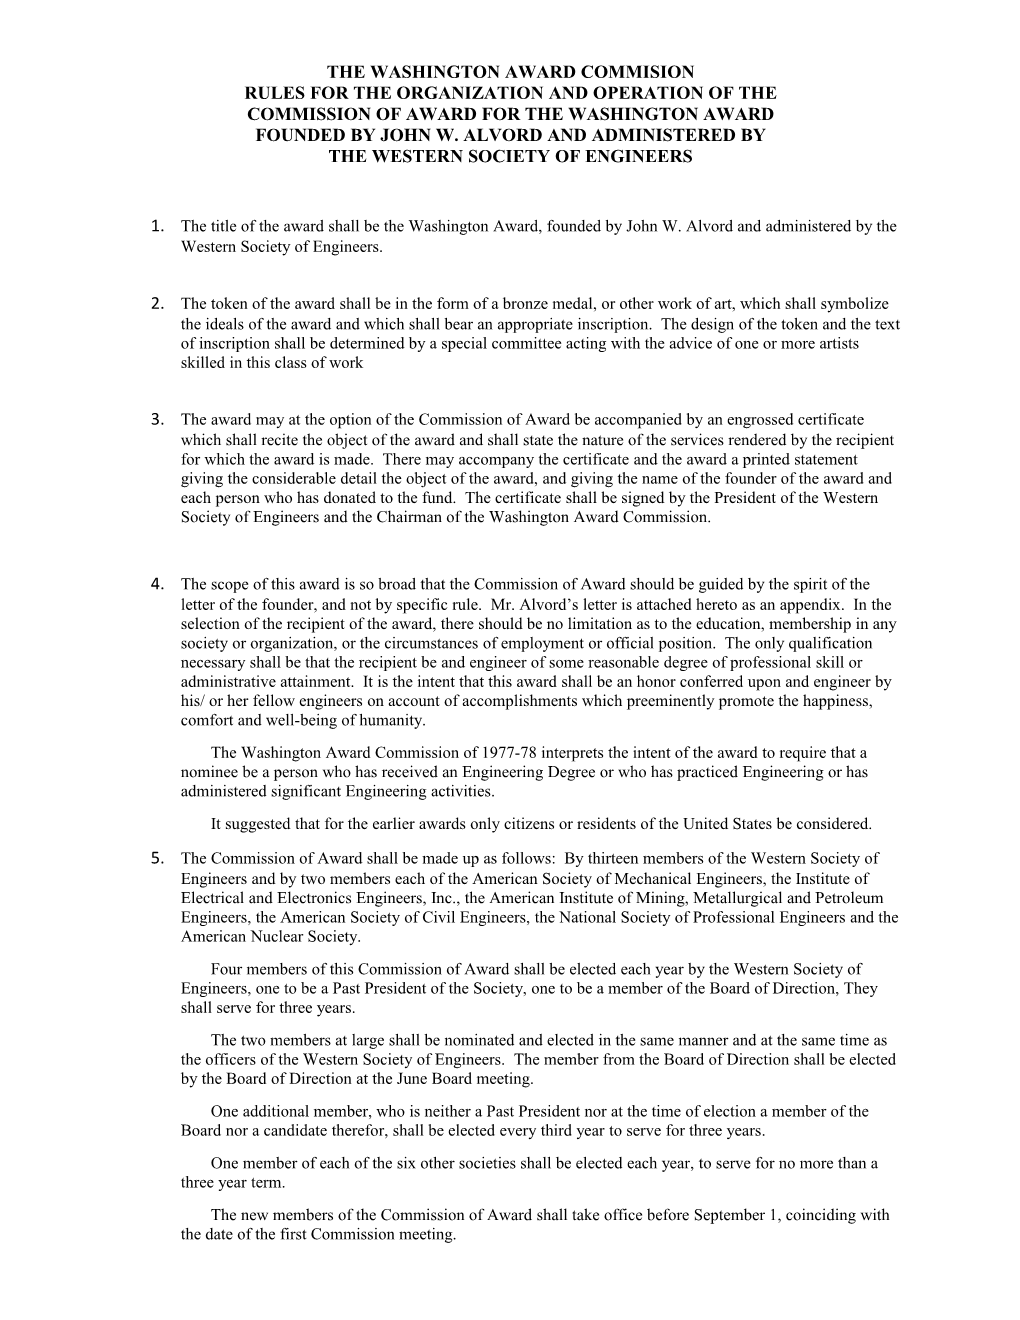 The Washington Award Commision Rules for the Organization and Operation of the Commission